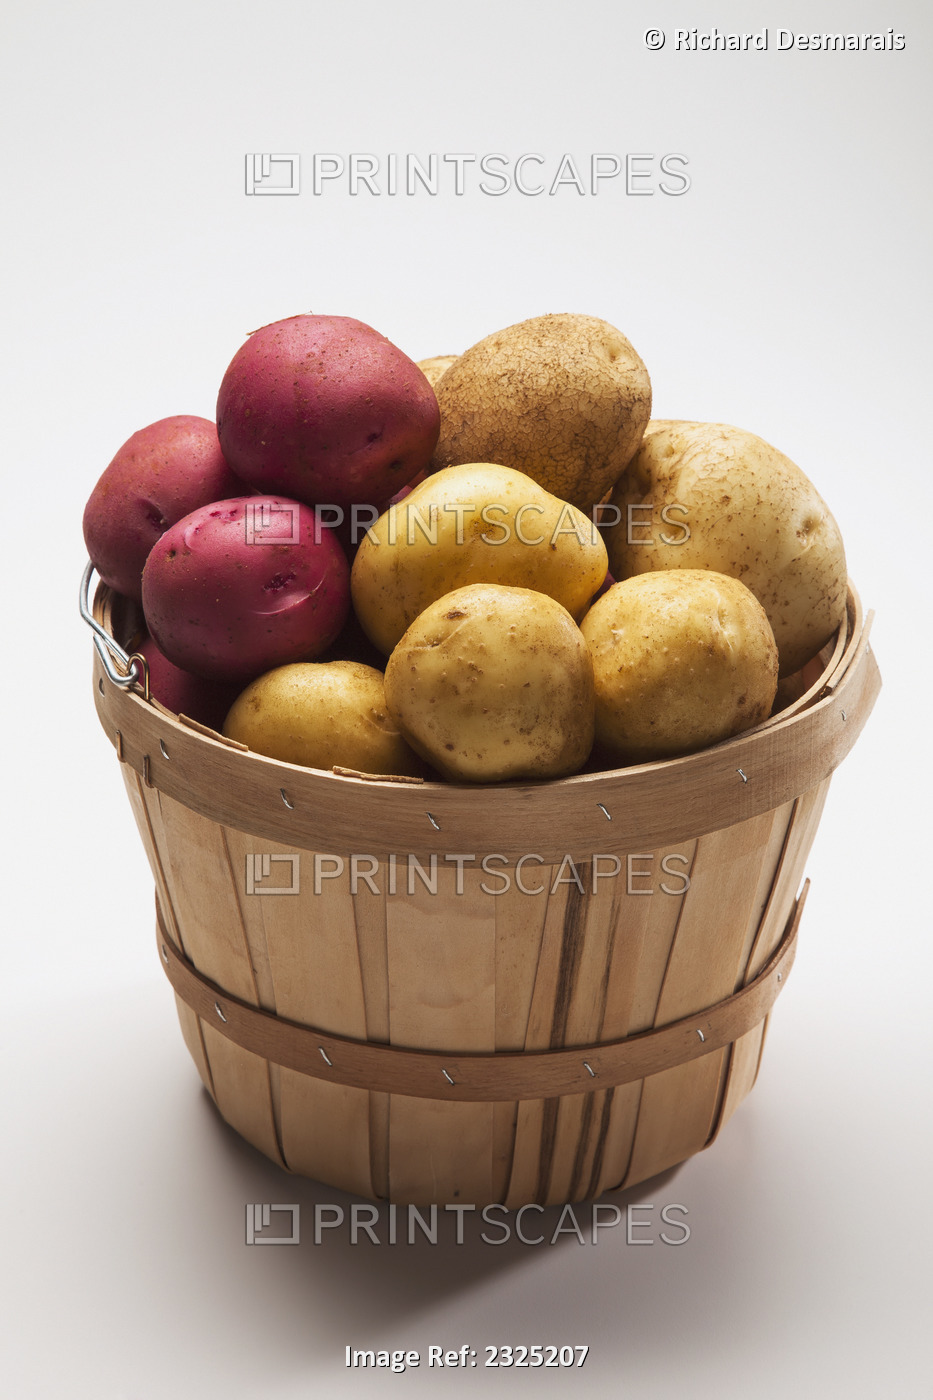 A basket full of white and red potatoes